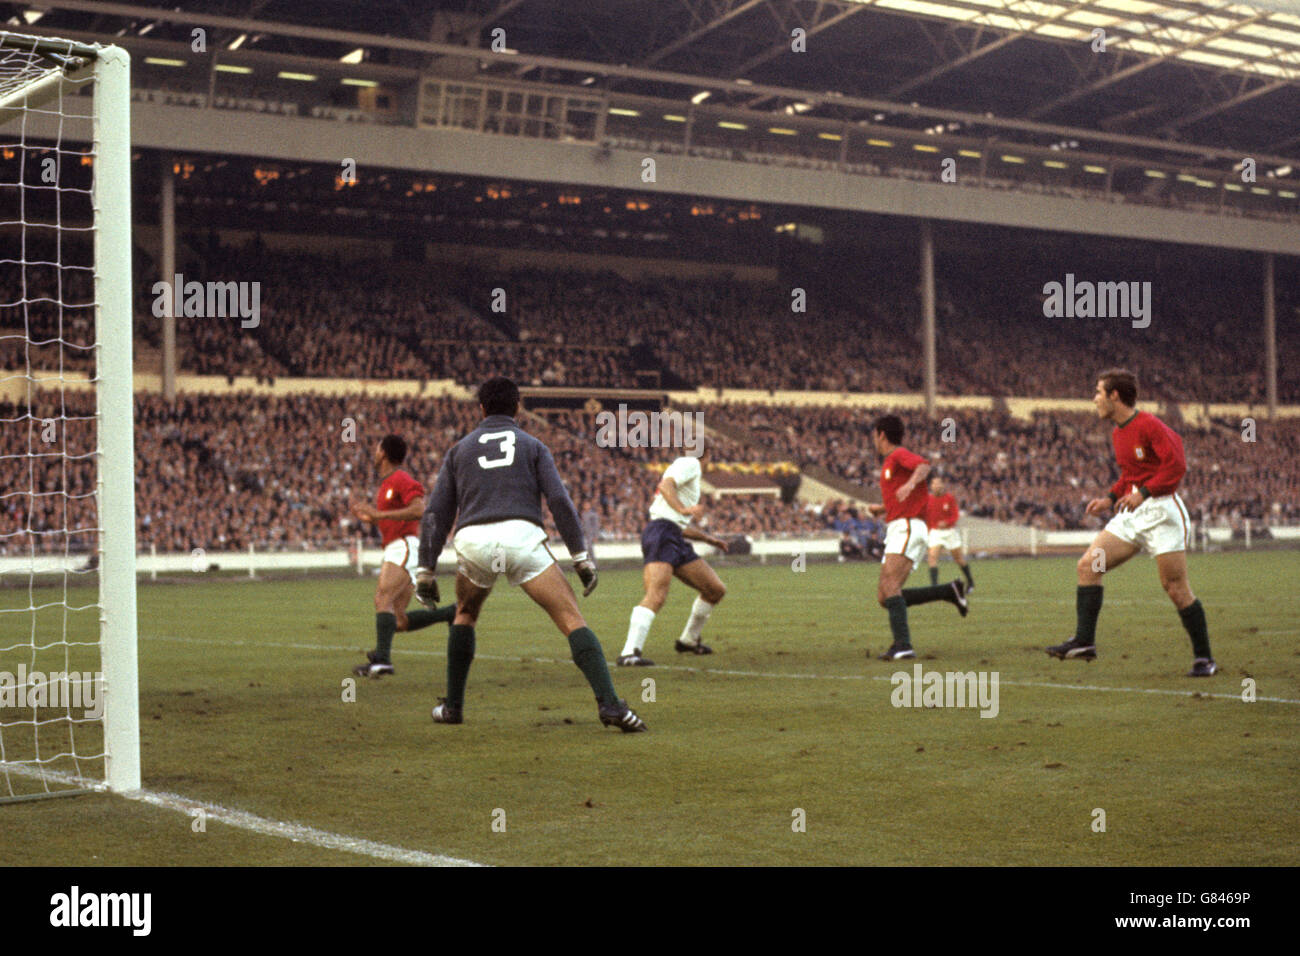 England attack Portugal's goal. Roger Hunt watches the ball pass under him. The Portugal goalkeeper is Jose Pereira. Stock Photo